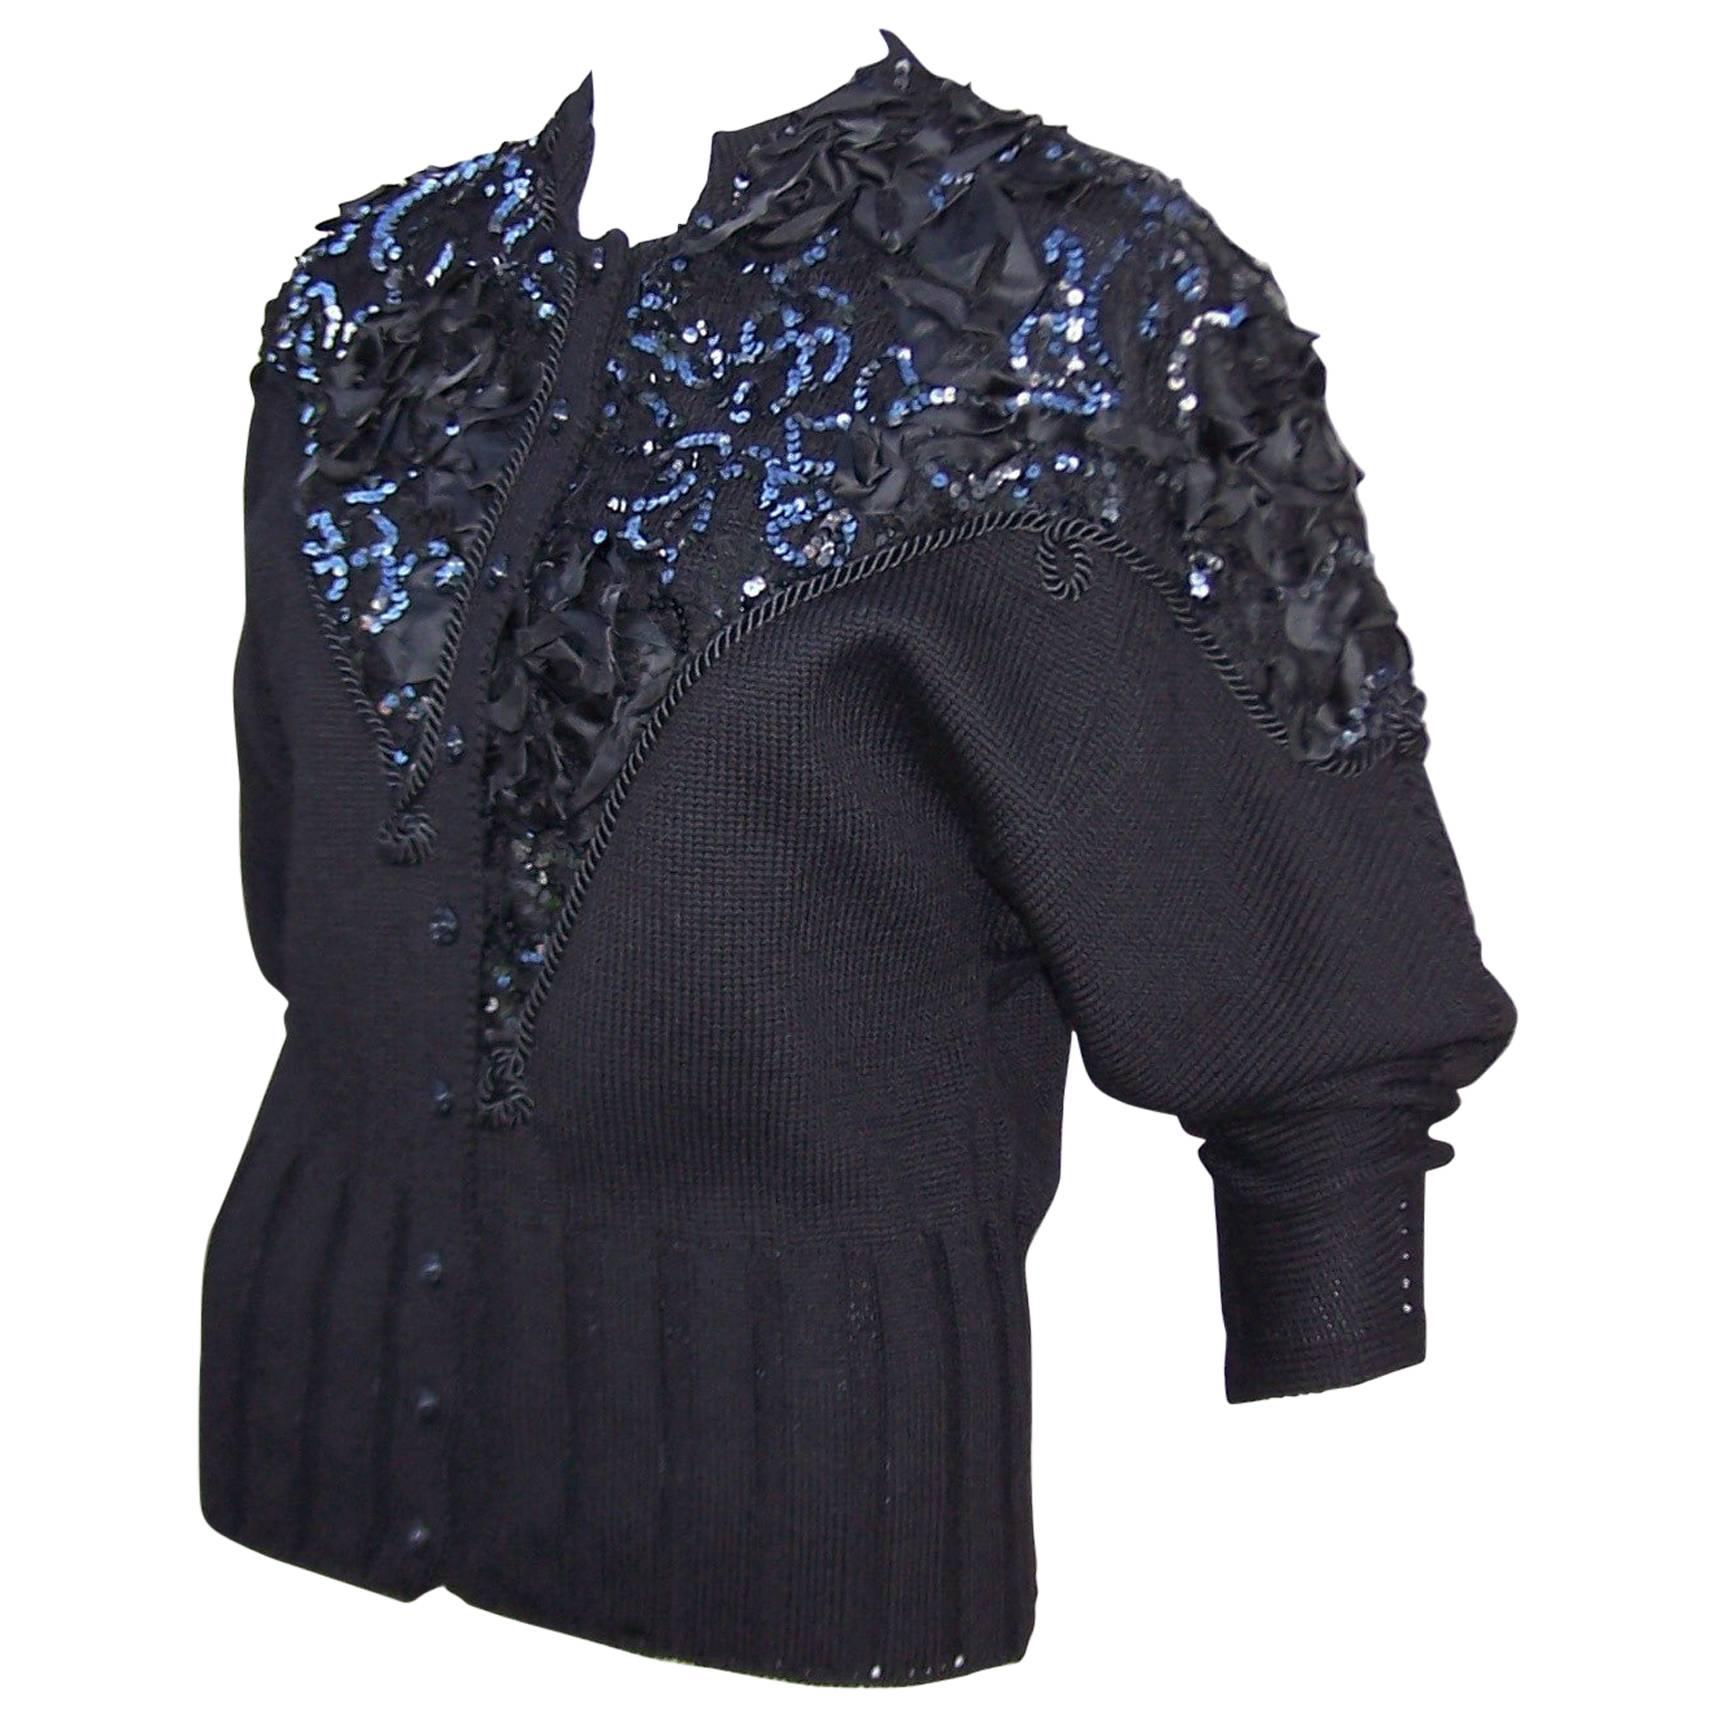 Bedazzled 1980's French Black Wool Evening Sweater 